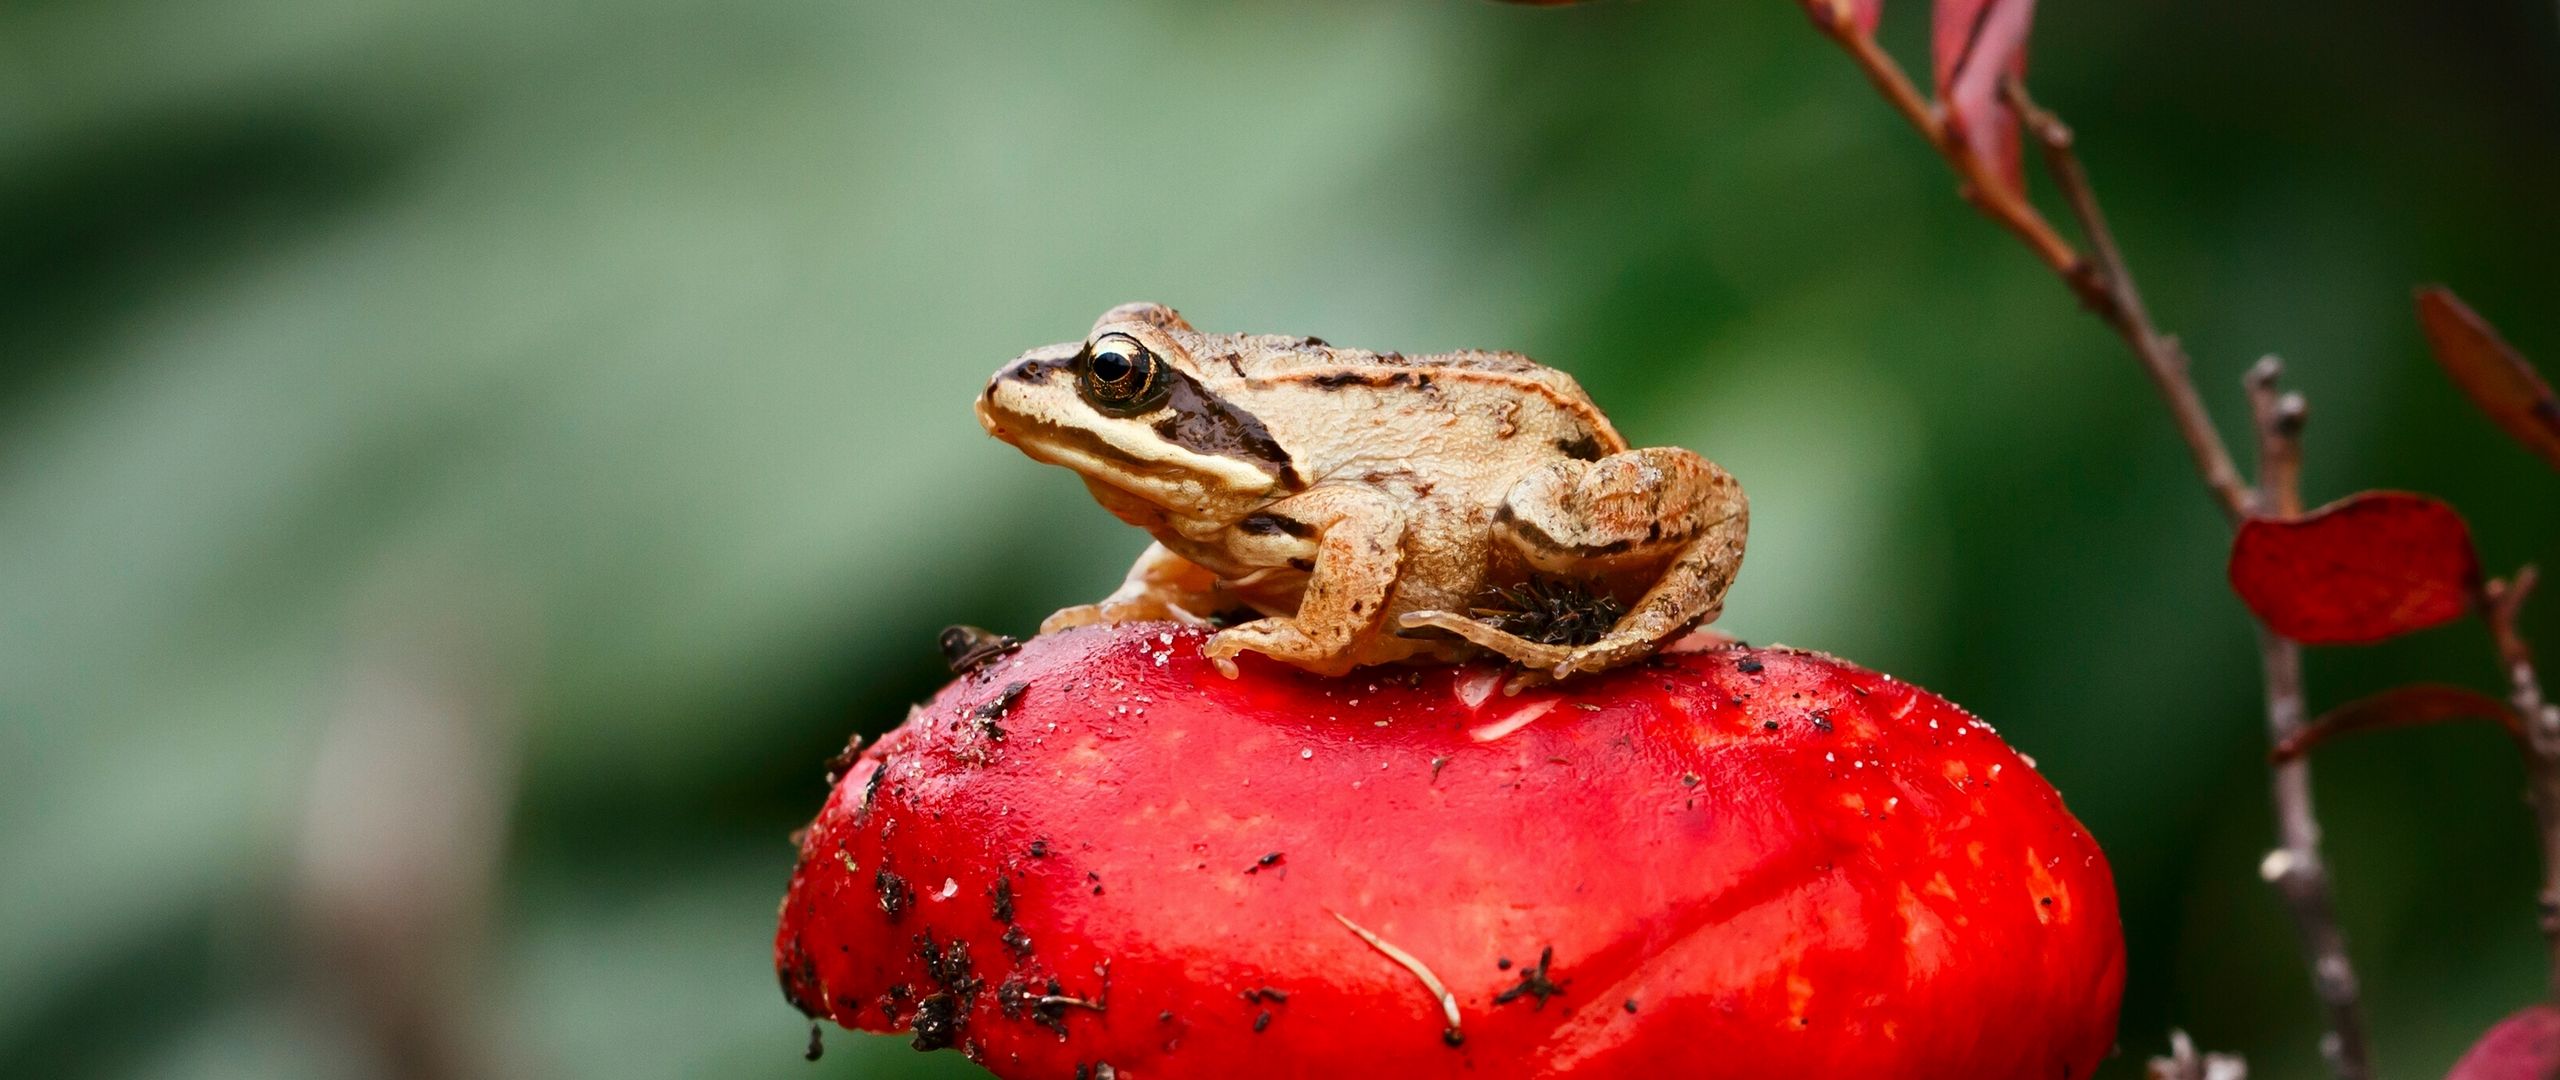 Download Wallpaper 2560x1080 Frog, Mushroom, Toadstool, Sit, Close Up Dual Wide 1080p HD Background